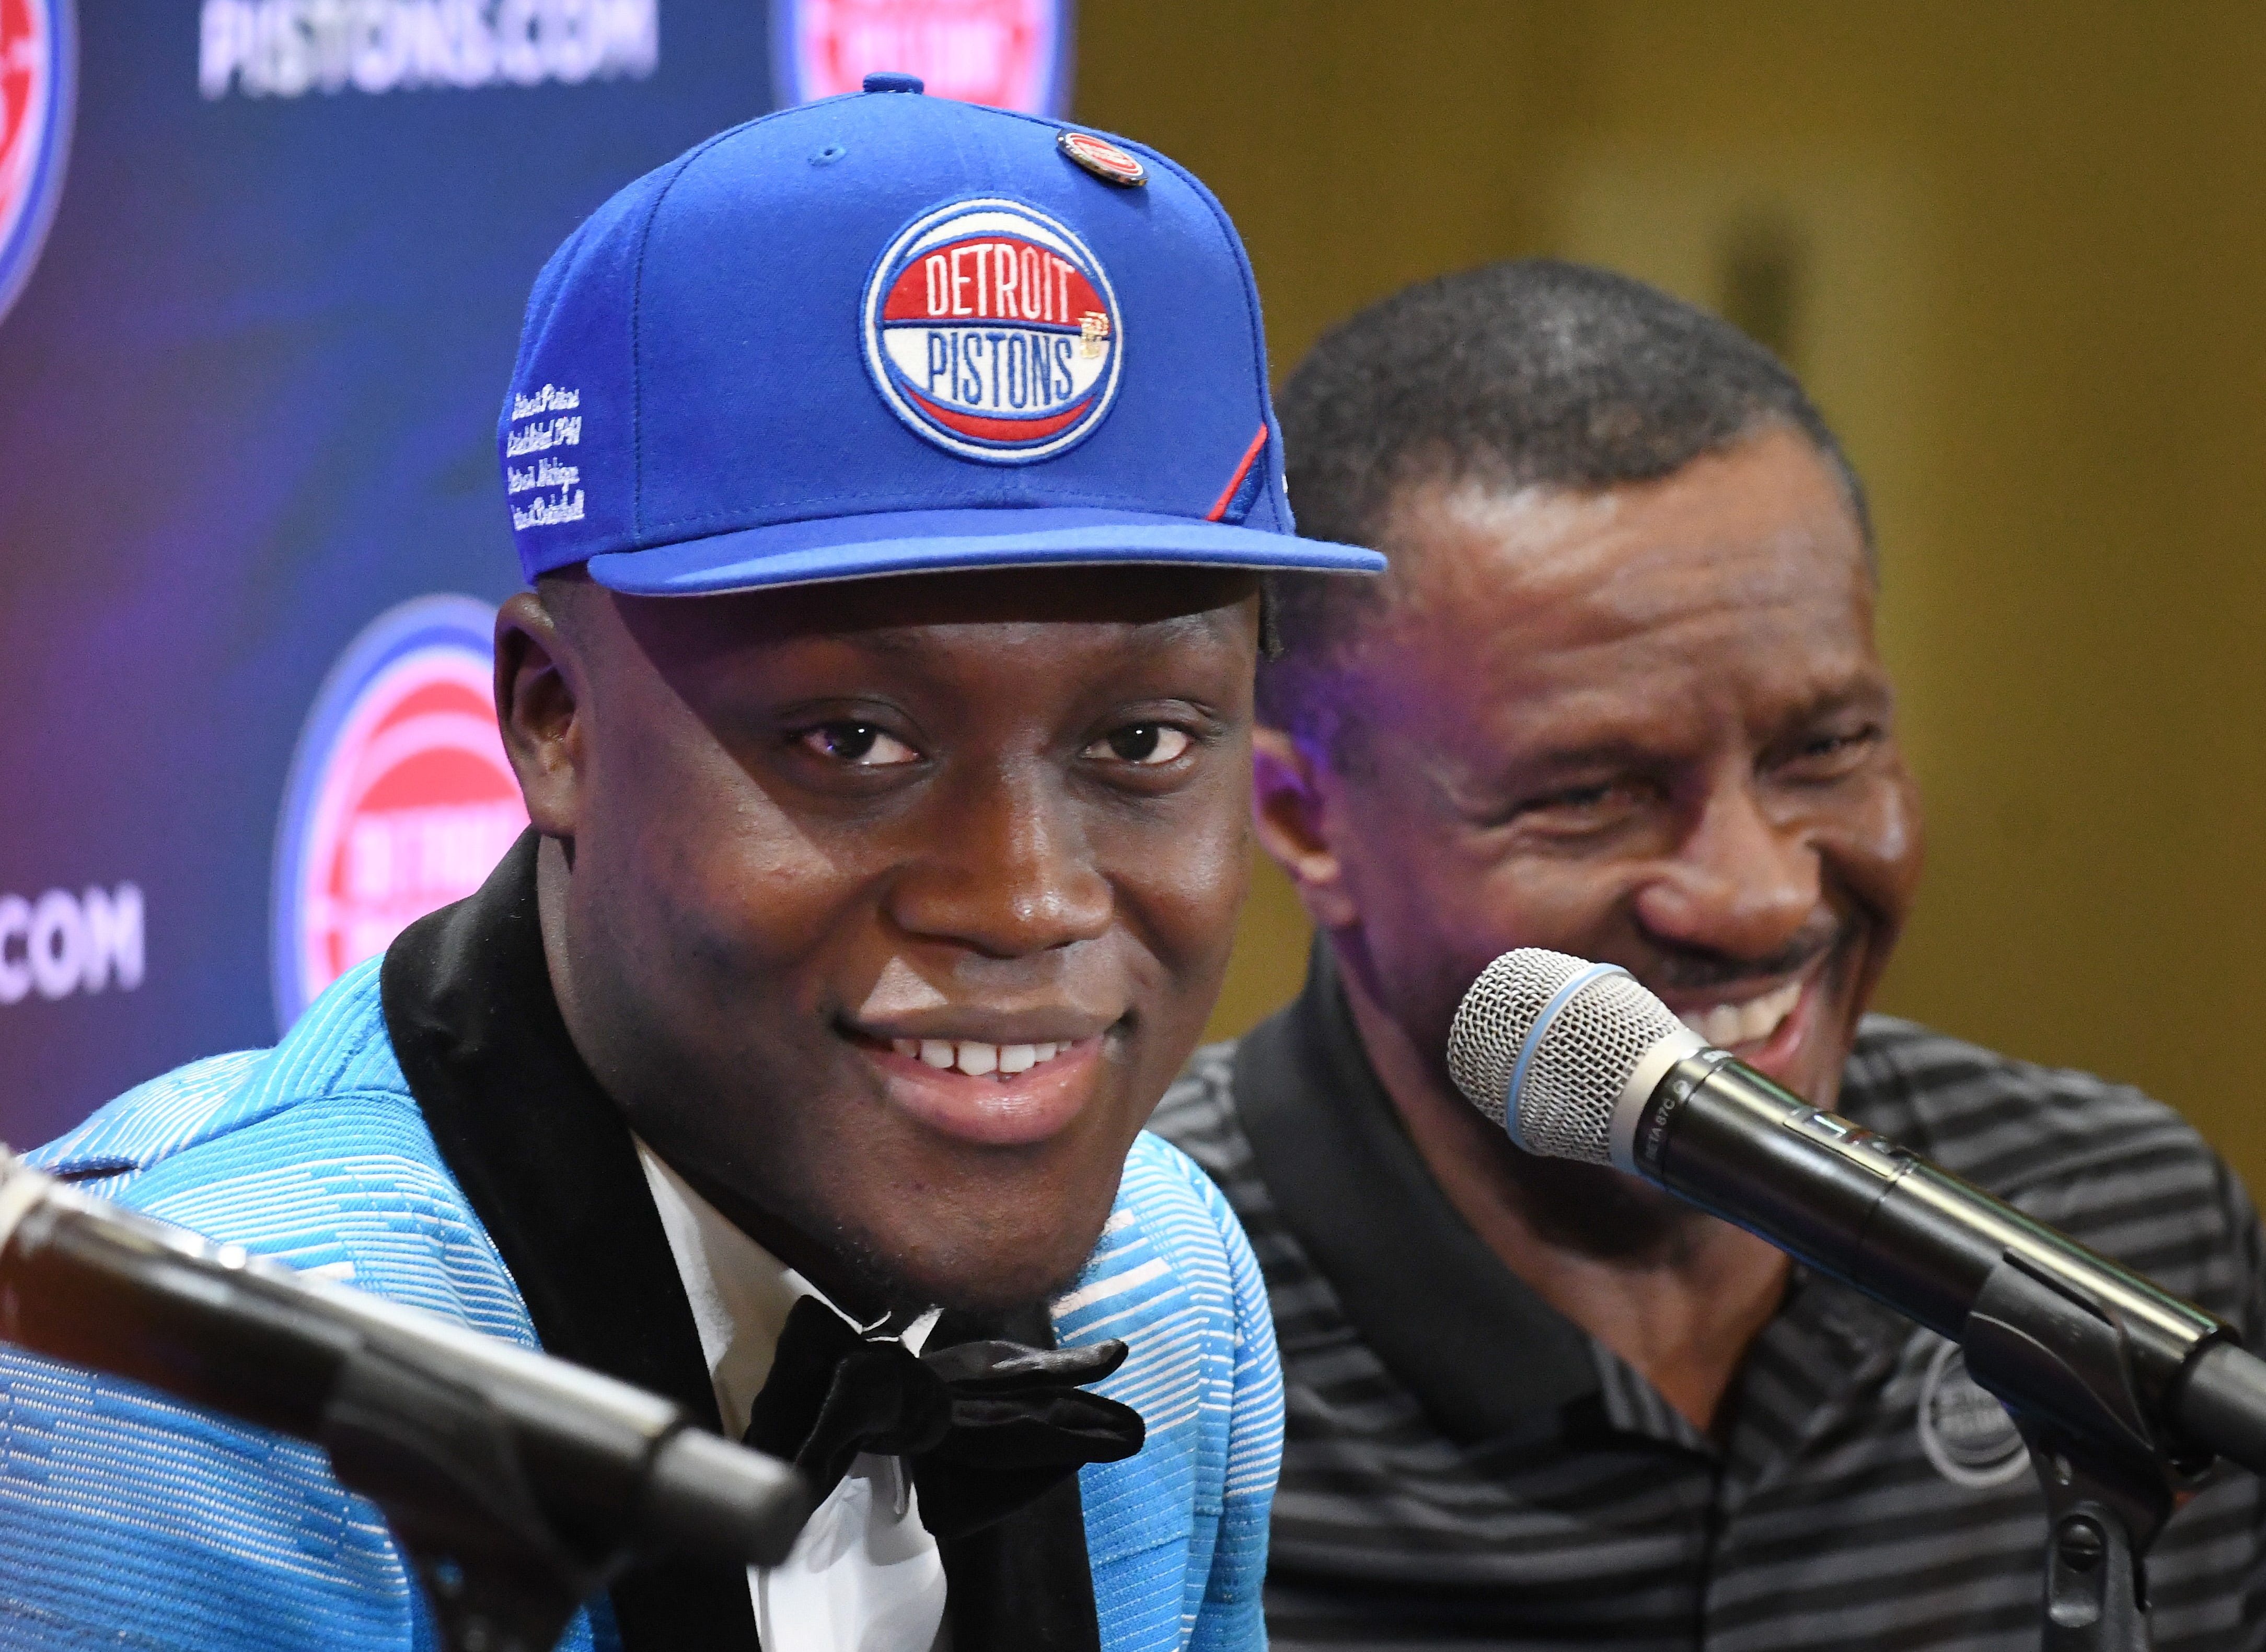 Pistons first round draft pick Sekou Doumbouya, with head coach Dwane Casey, addresses the media during a press conference at the practice facility in Auburn Hills, Michigan on June 21, 2019.